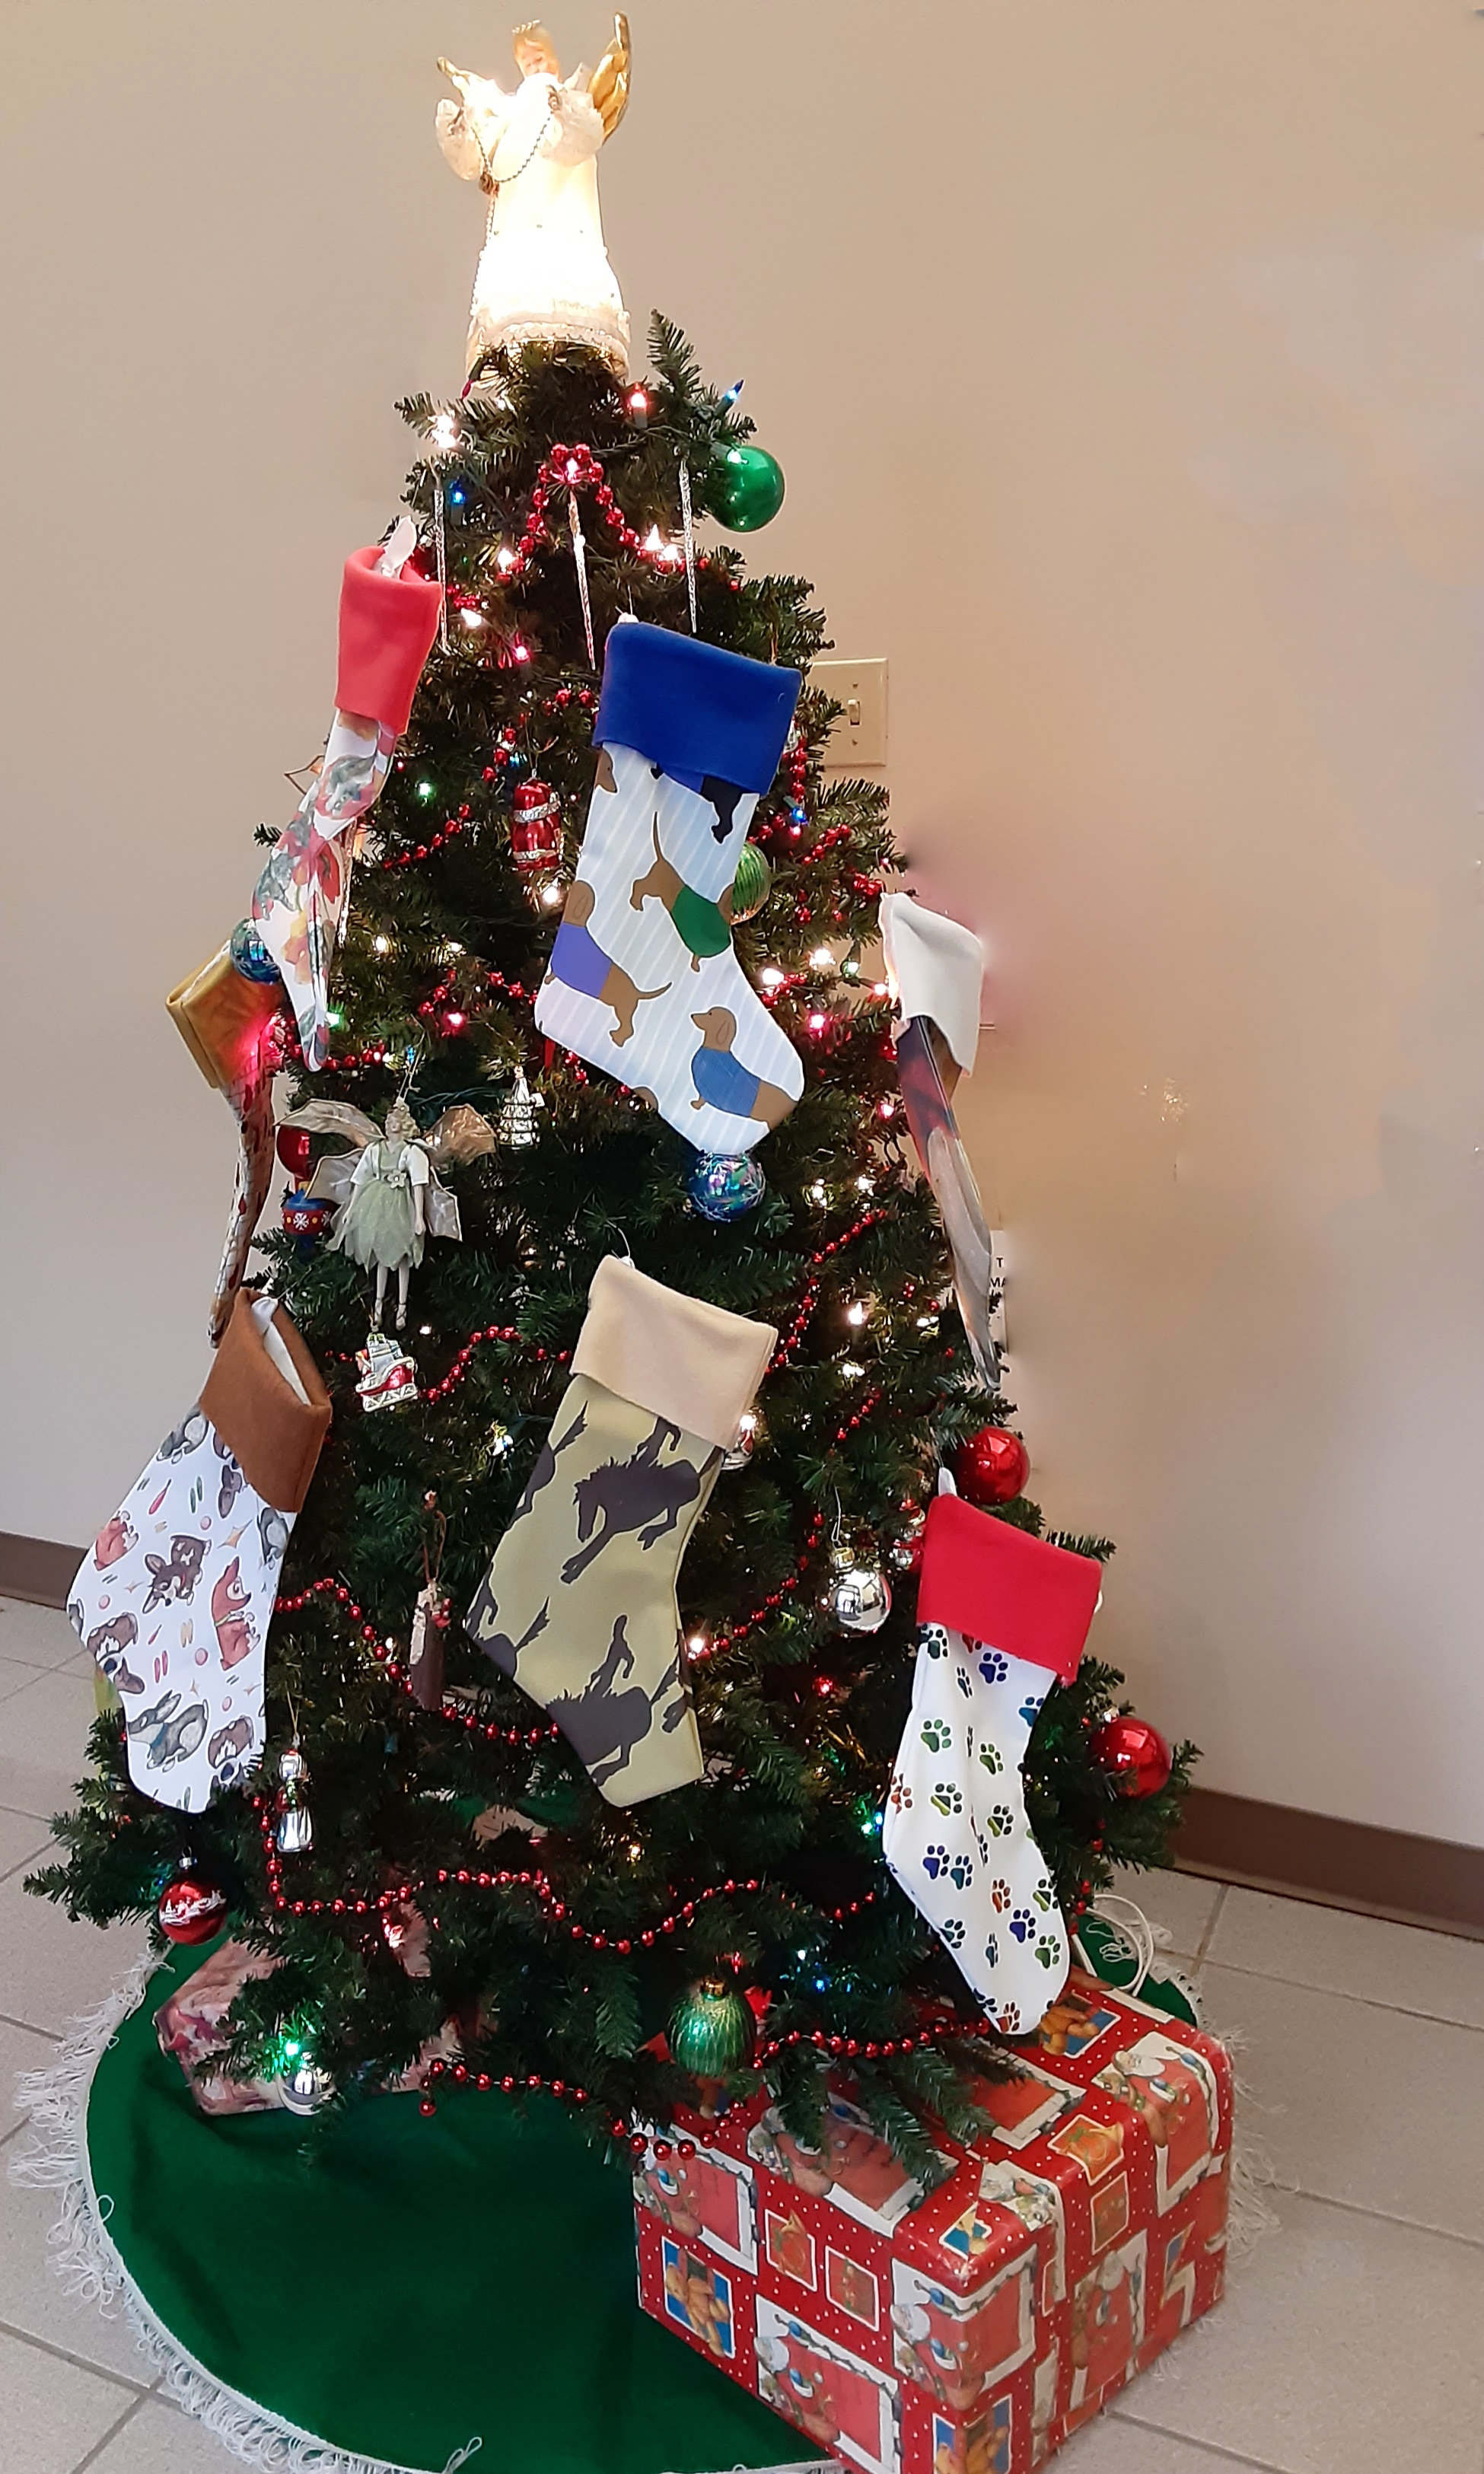 Stocking Tree made with sublimation printing